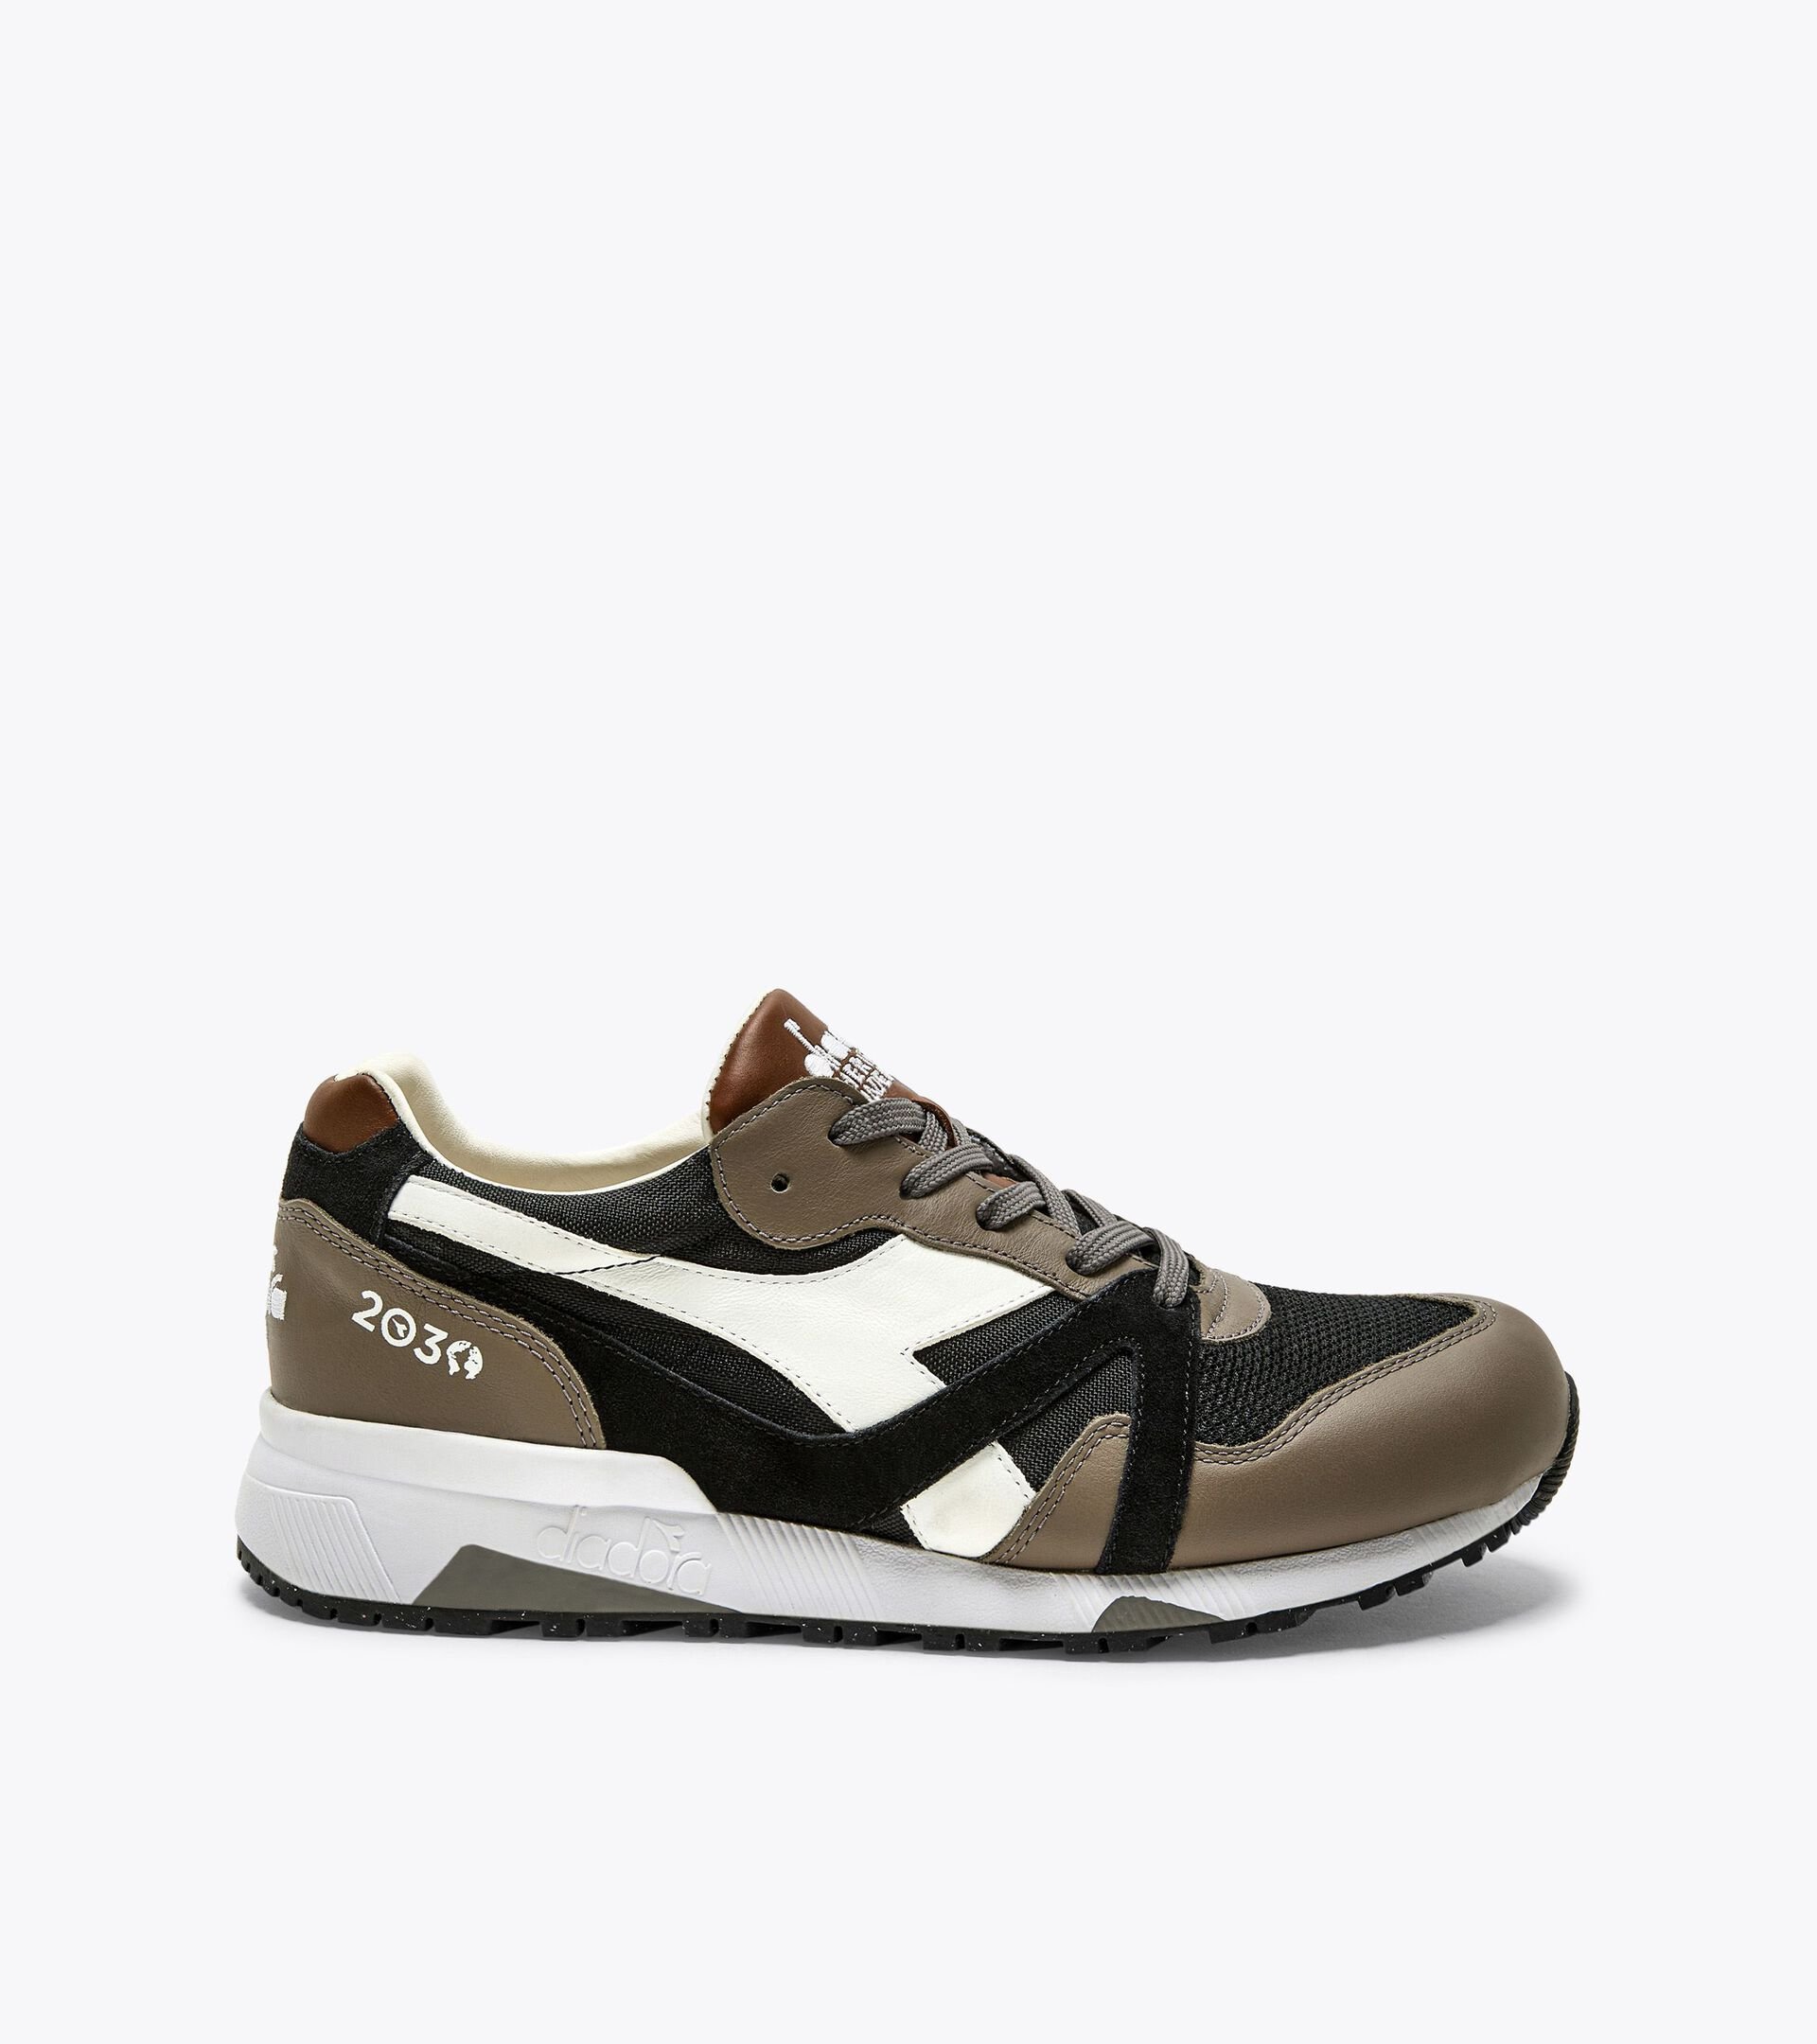 Chaussures Heritage Made in Italy - Homme N9000 2030 ITALIA NOIR - Diadora